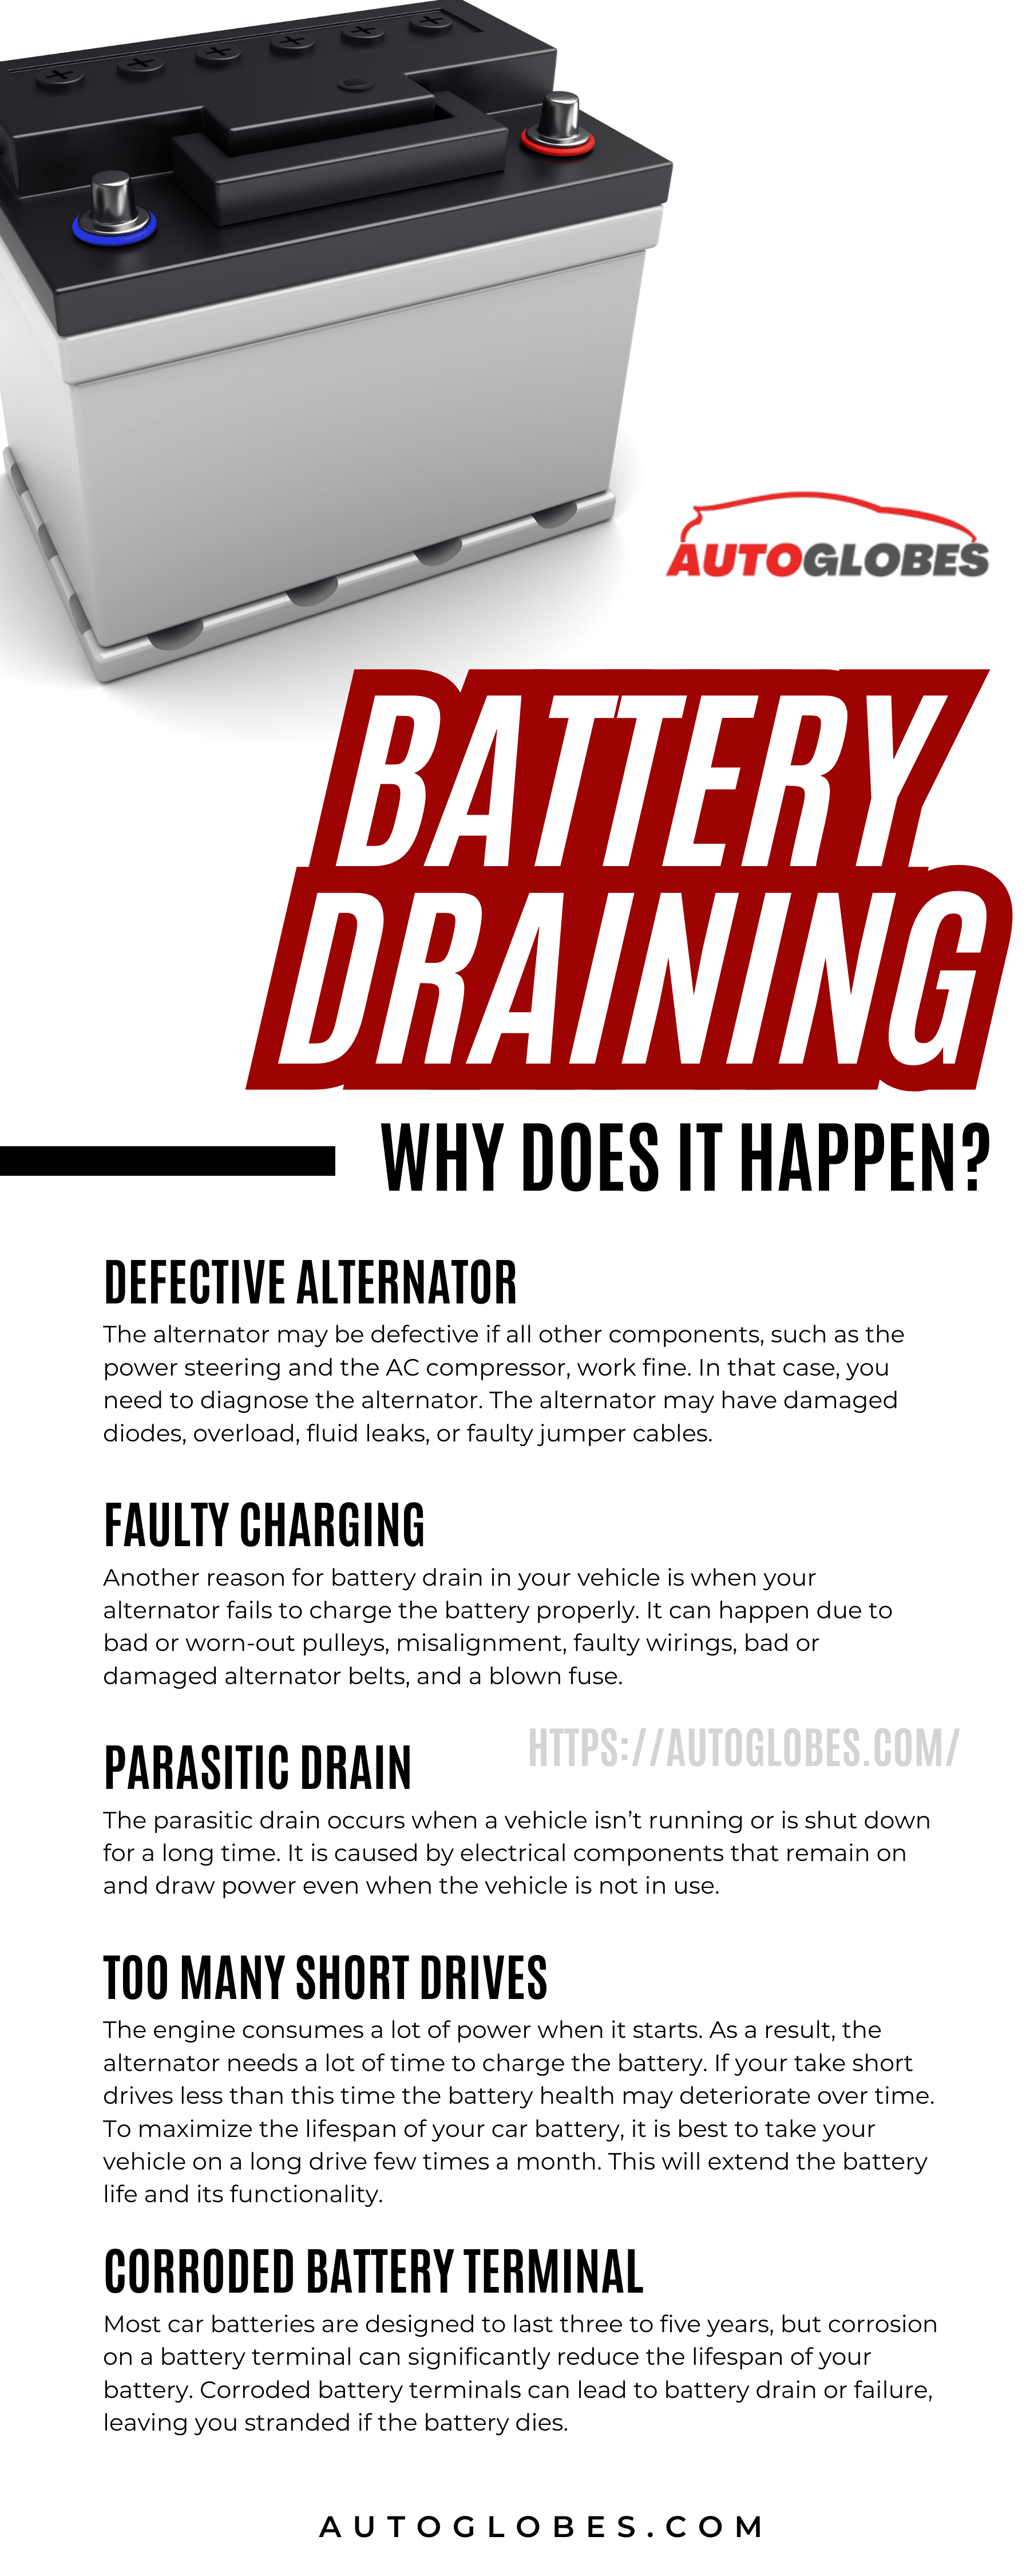 Battery Draining: Why Does It Happen? Infographic